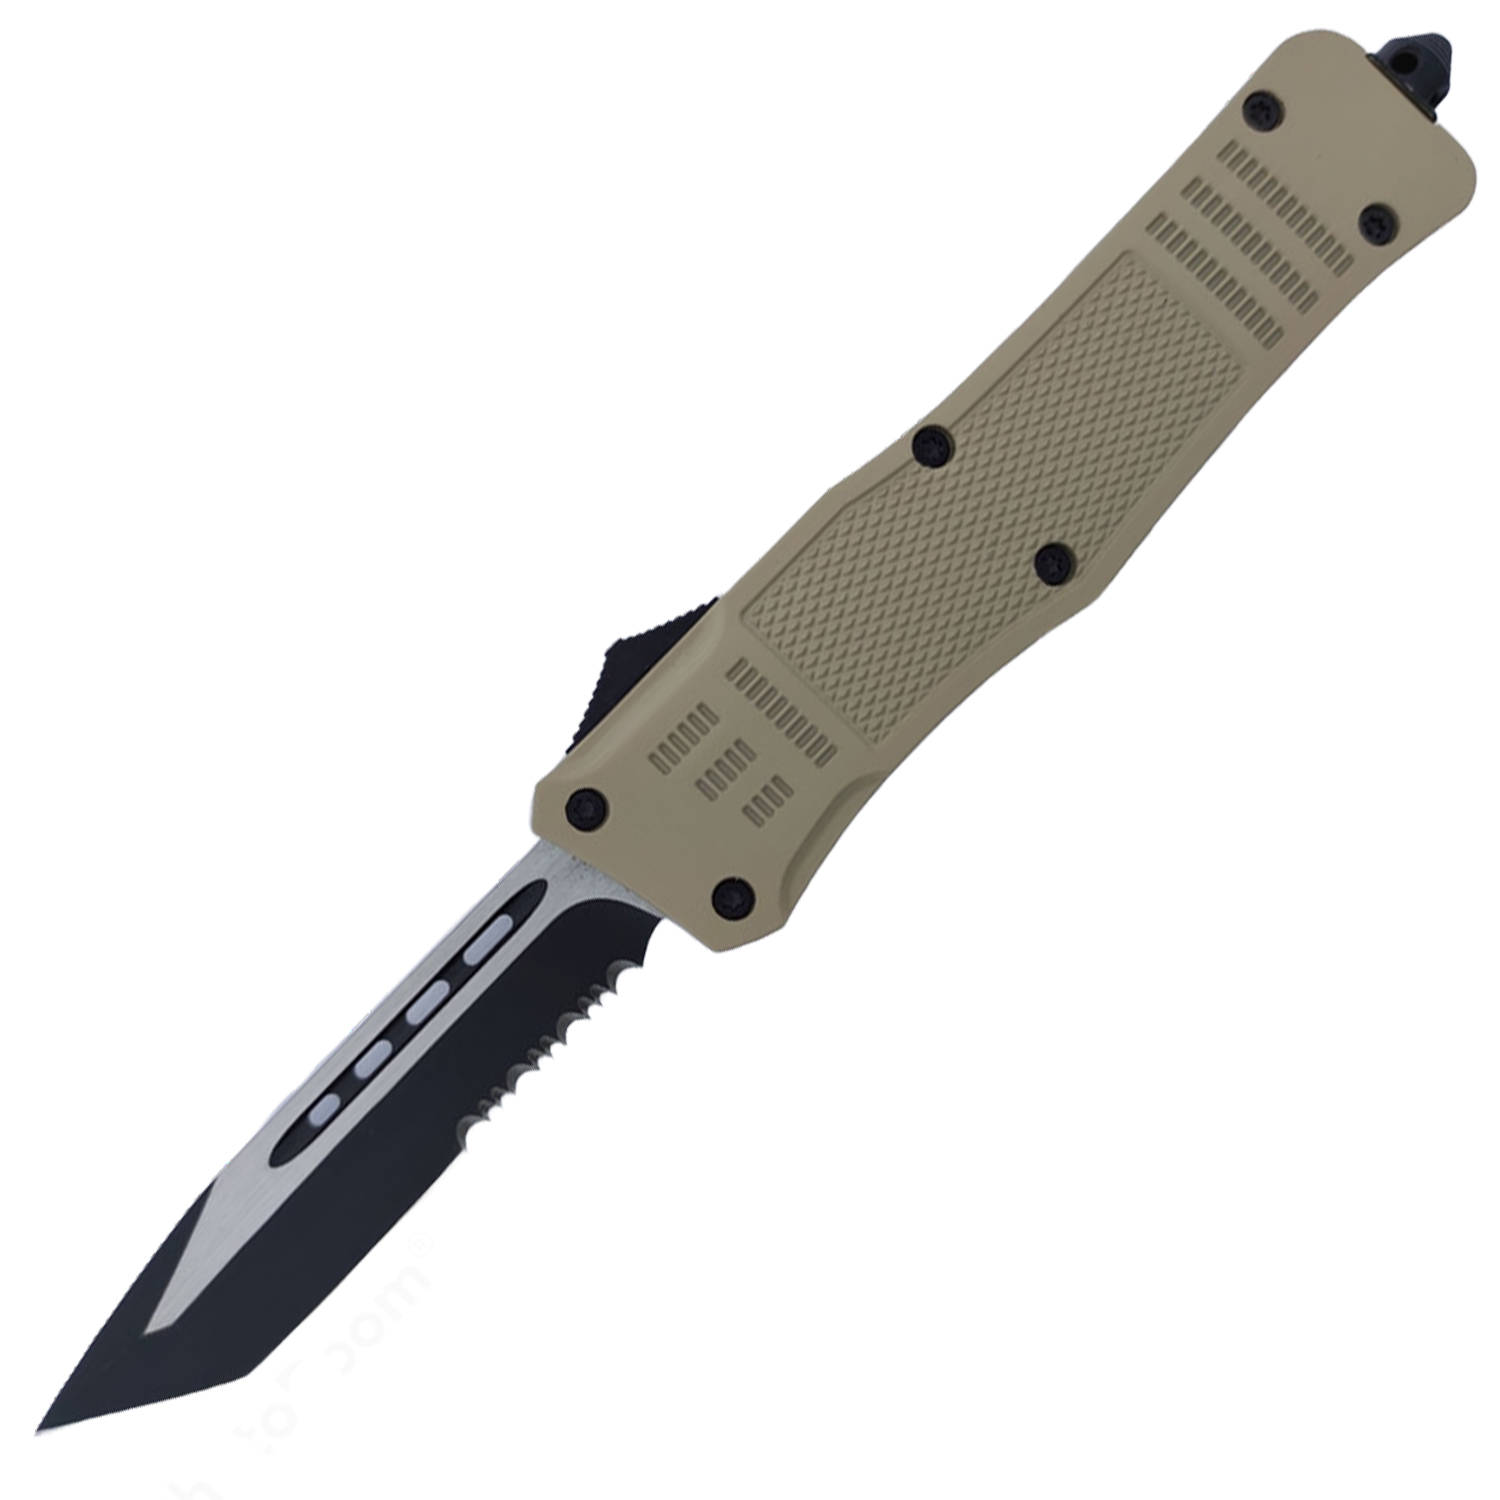 Covert OPS USA OTF Automatic Knife 9 inch Beige D2 Steel Blade Tanto Serr